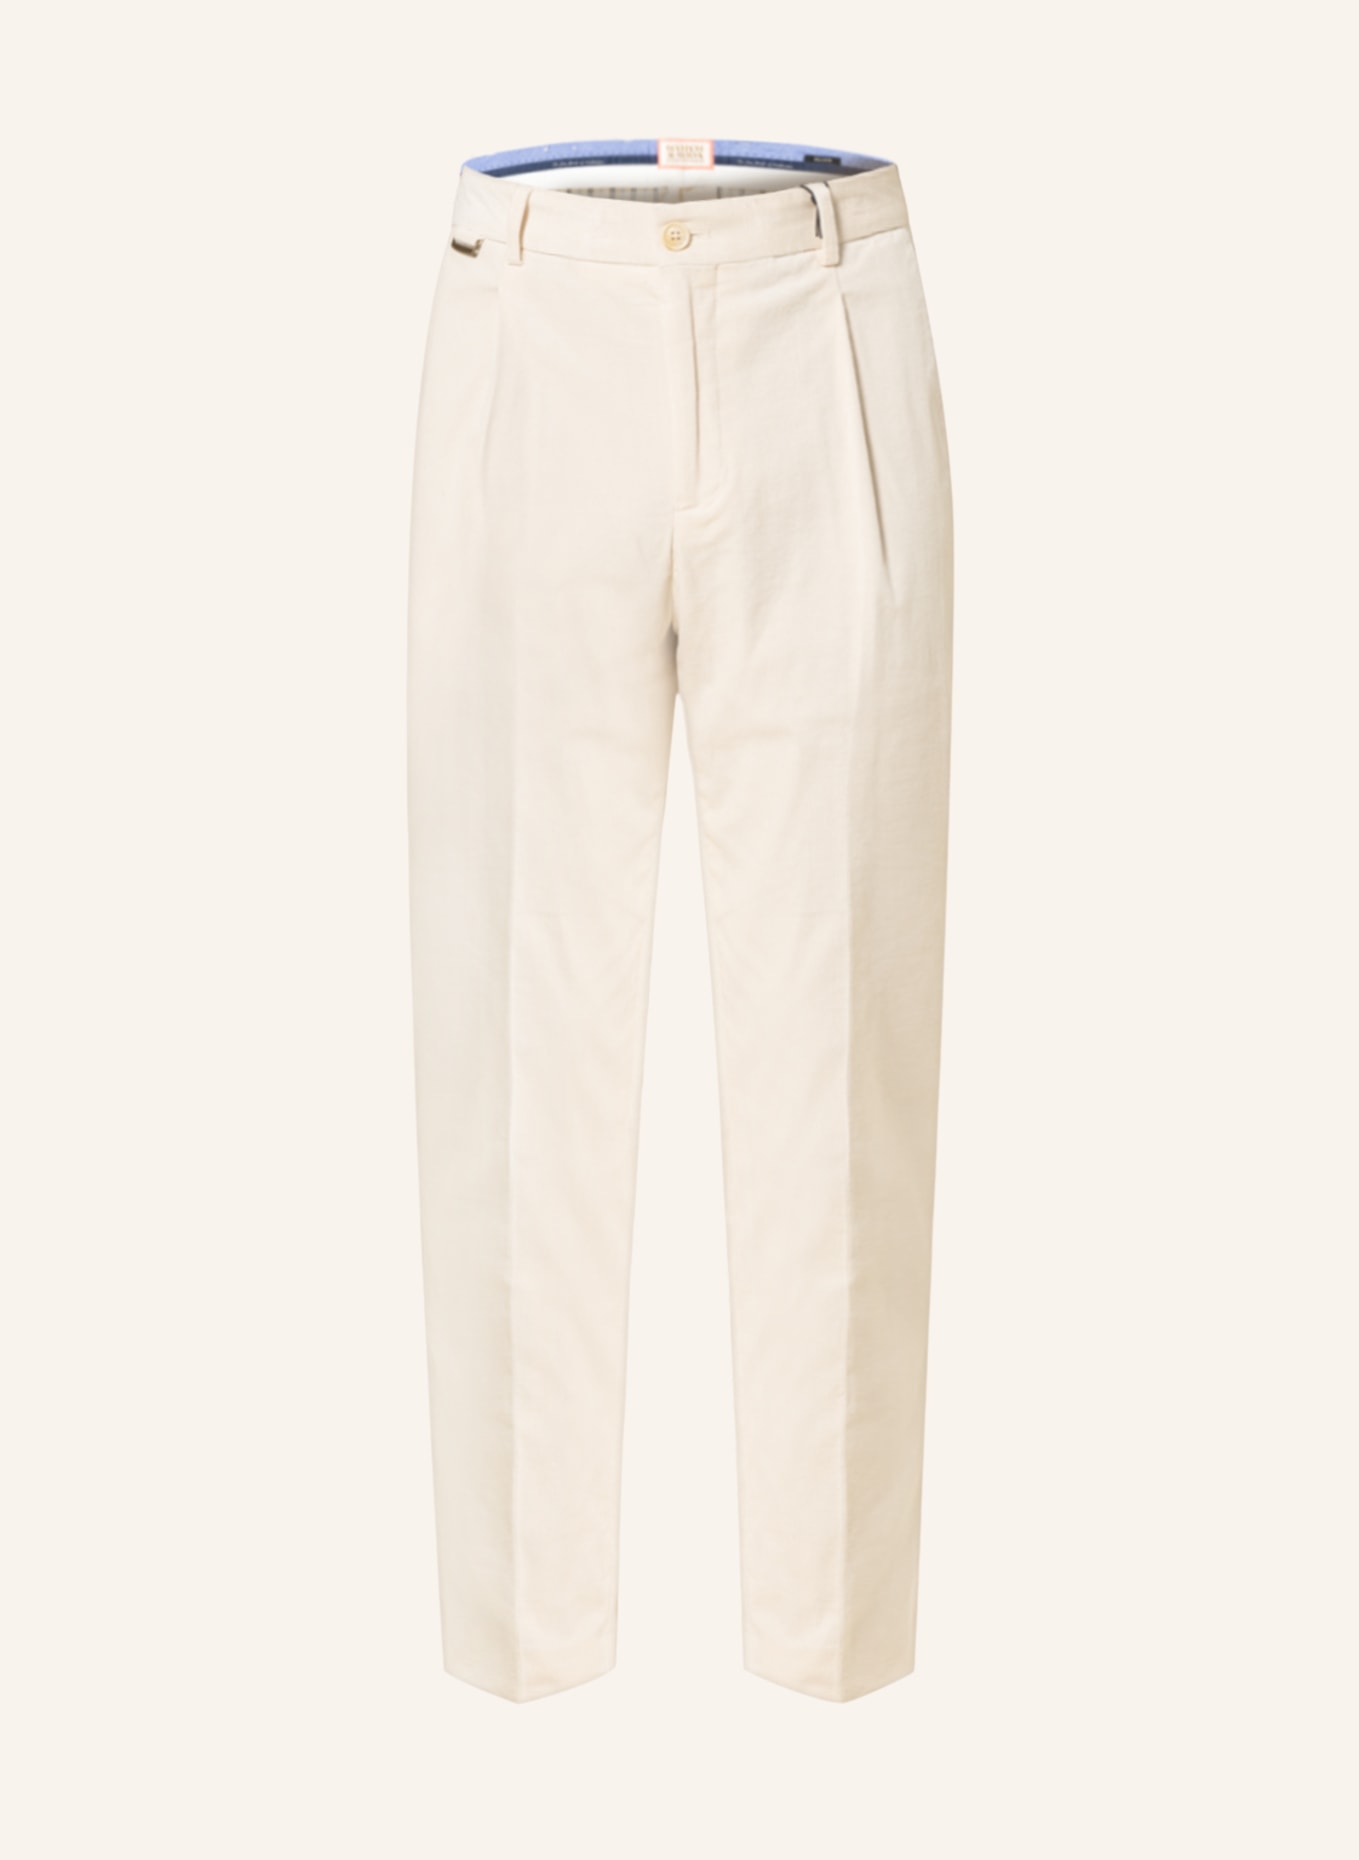 Urban Outfitters  Pants  Jumpsuits  Urban Outfitters Cream Color Wide  Leg Corduroy Pants  Poshmark